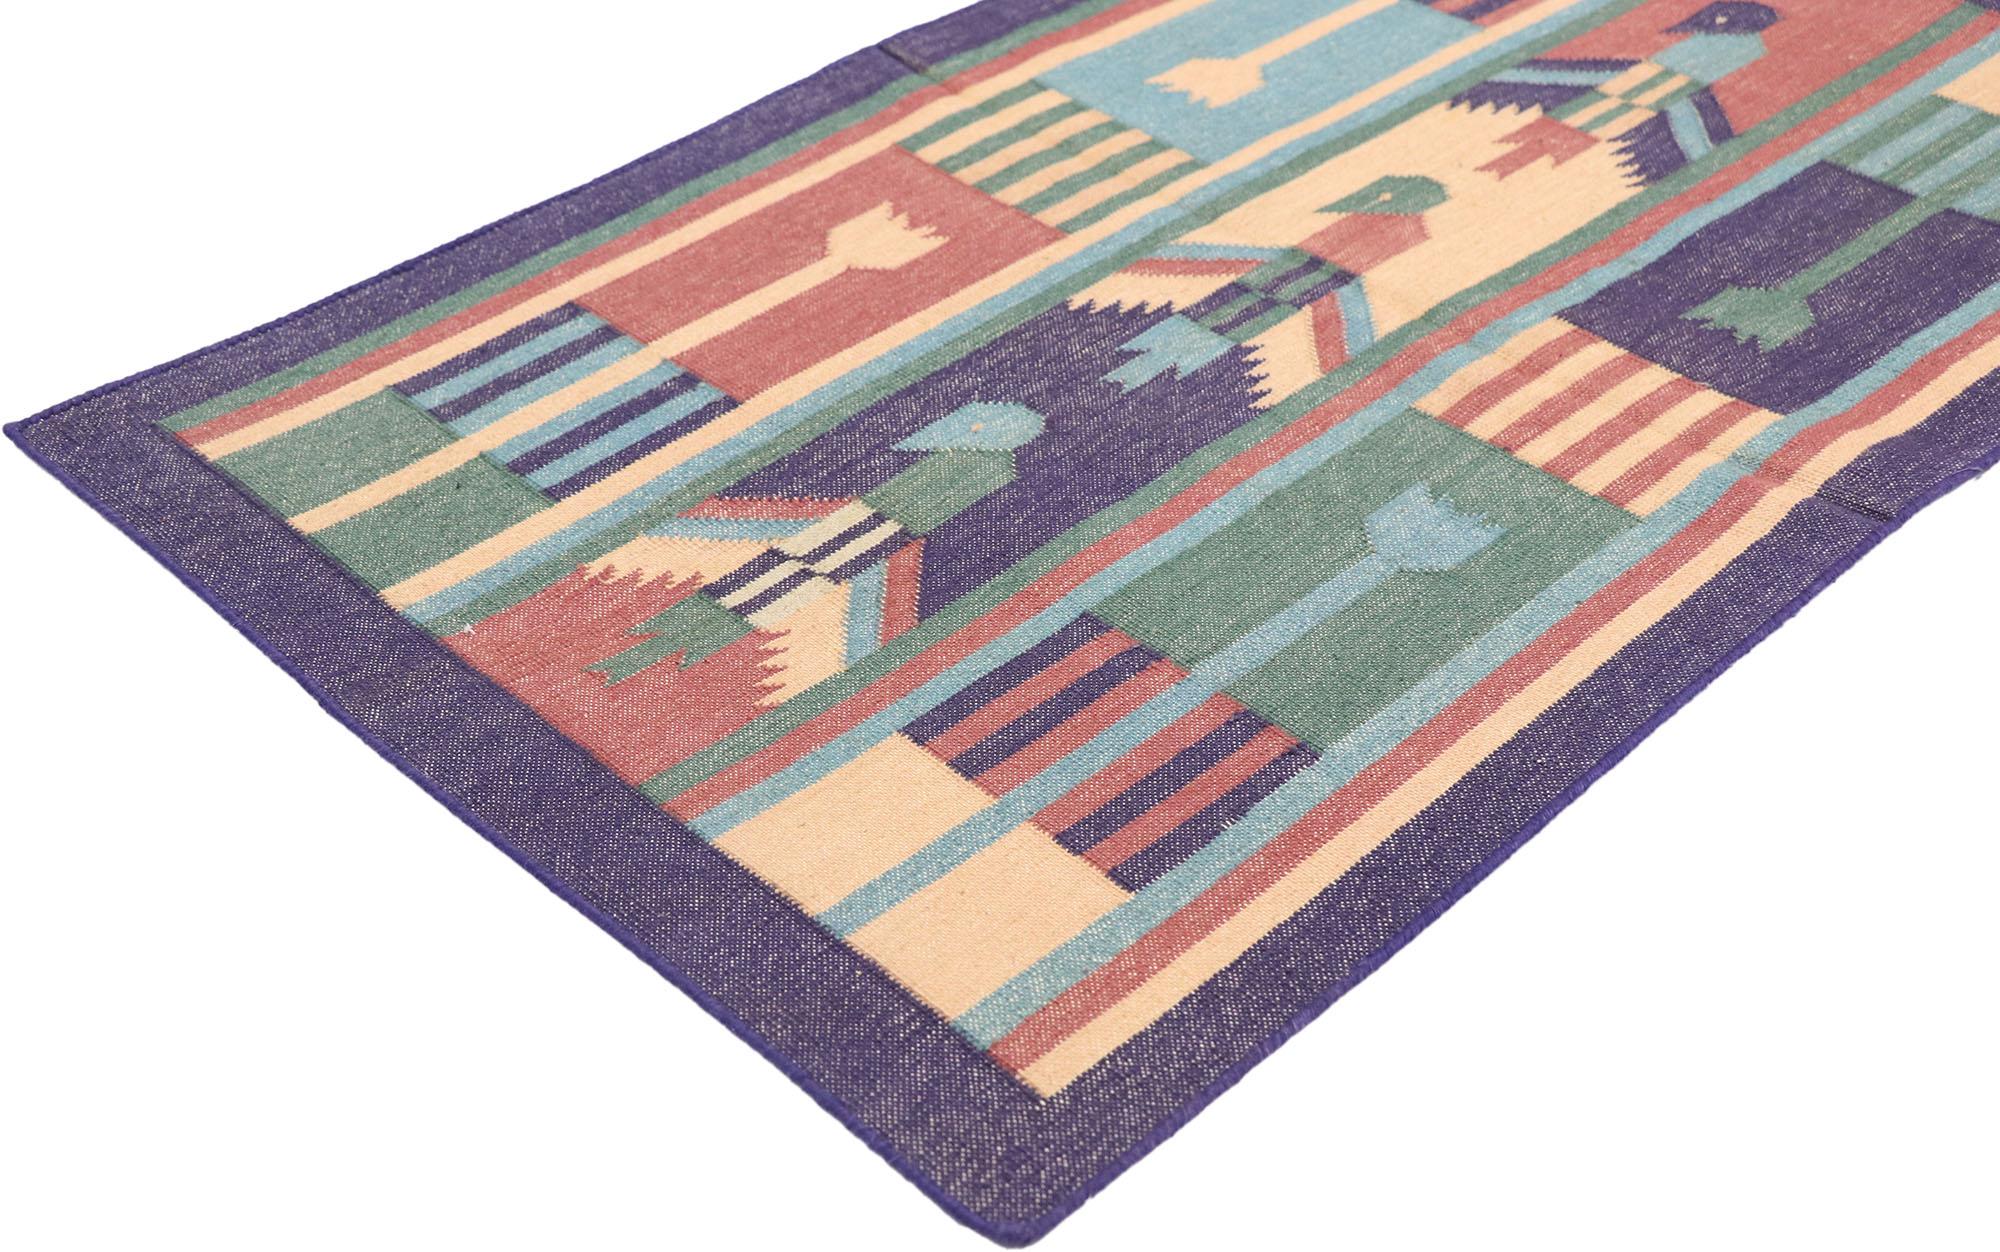 ?77912 Vintage Indian Dhurrie Rug with Postmodern Cubist Style 01'10 x 03'01. ??Full of tiny details and a bold expressive design combined with vibrant colors and tribal style, this hand-woven cotton vintage Indian Dhurrie rug is a captivating